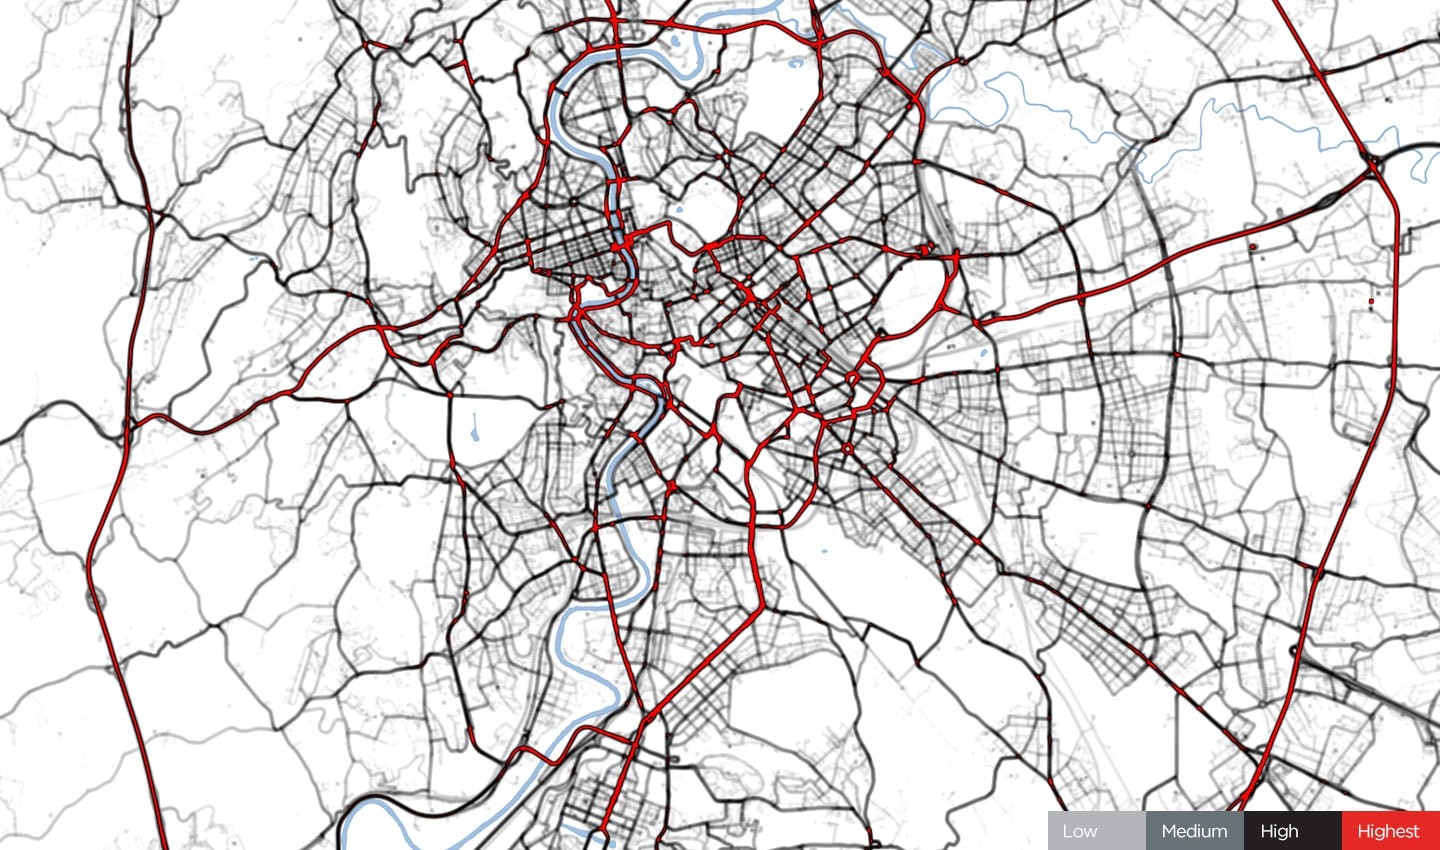 Traffic in Rome, January 24, 2020. Before COVID-19 restrictions.